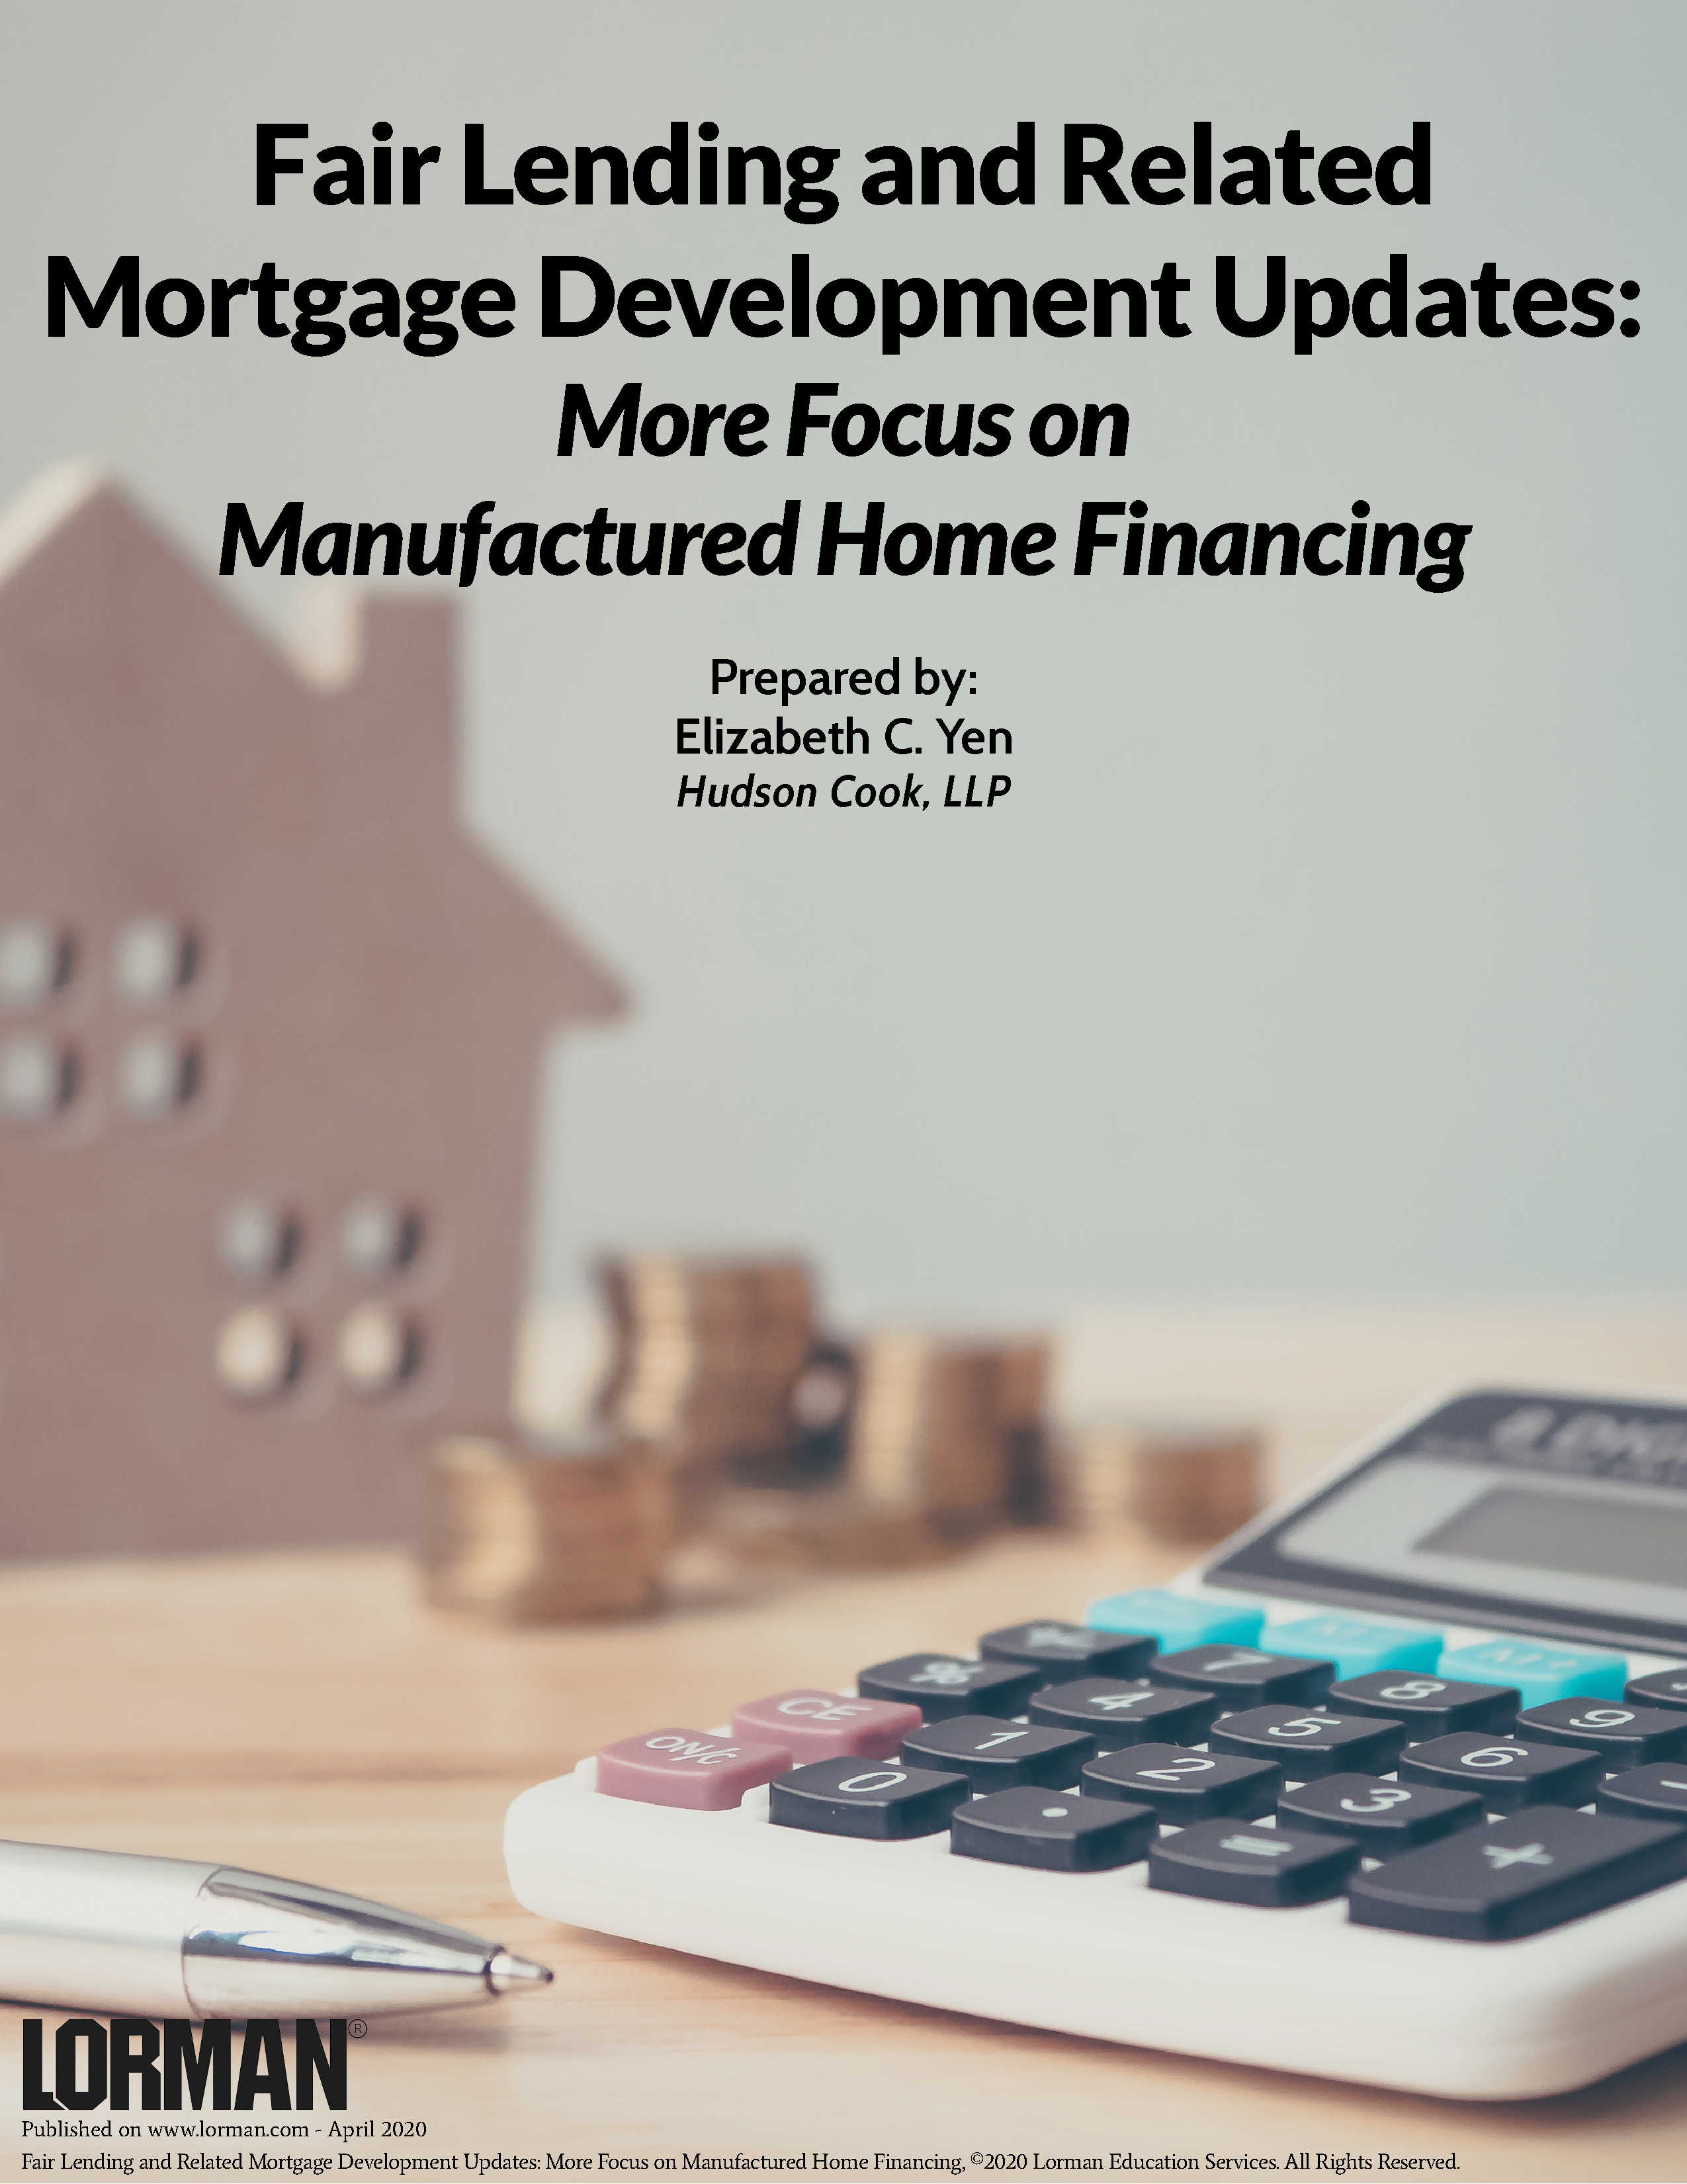 Fair Lending and Related Mortgage Development Updates: More Focus on Manufactured Home Financing